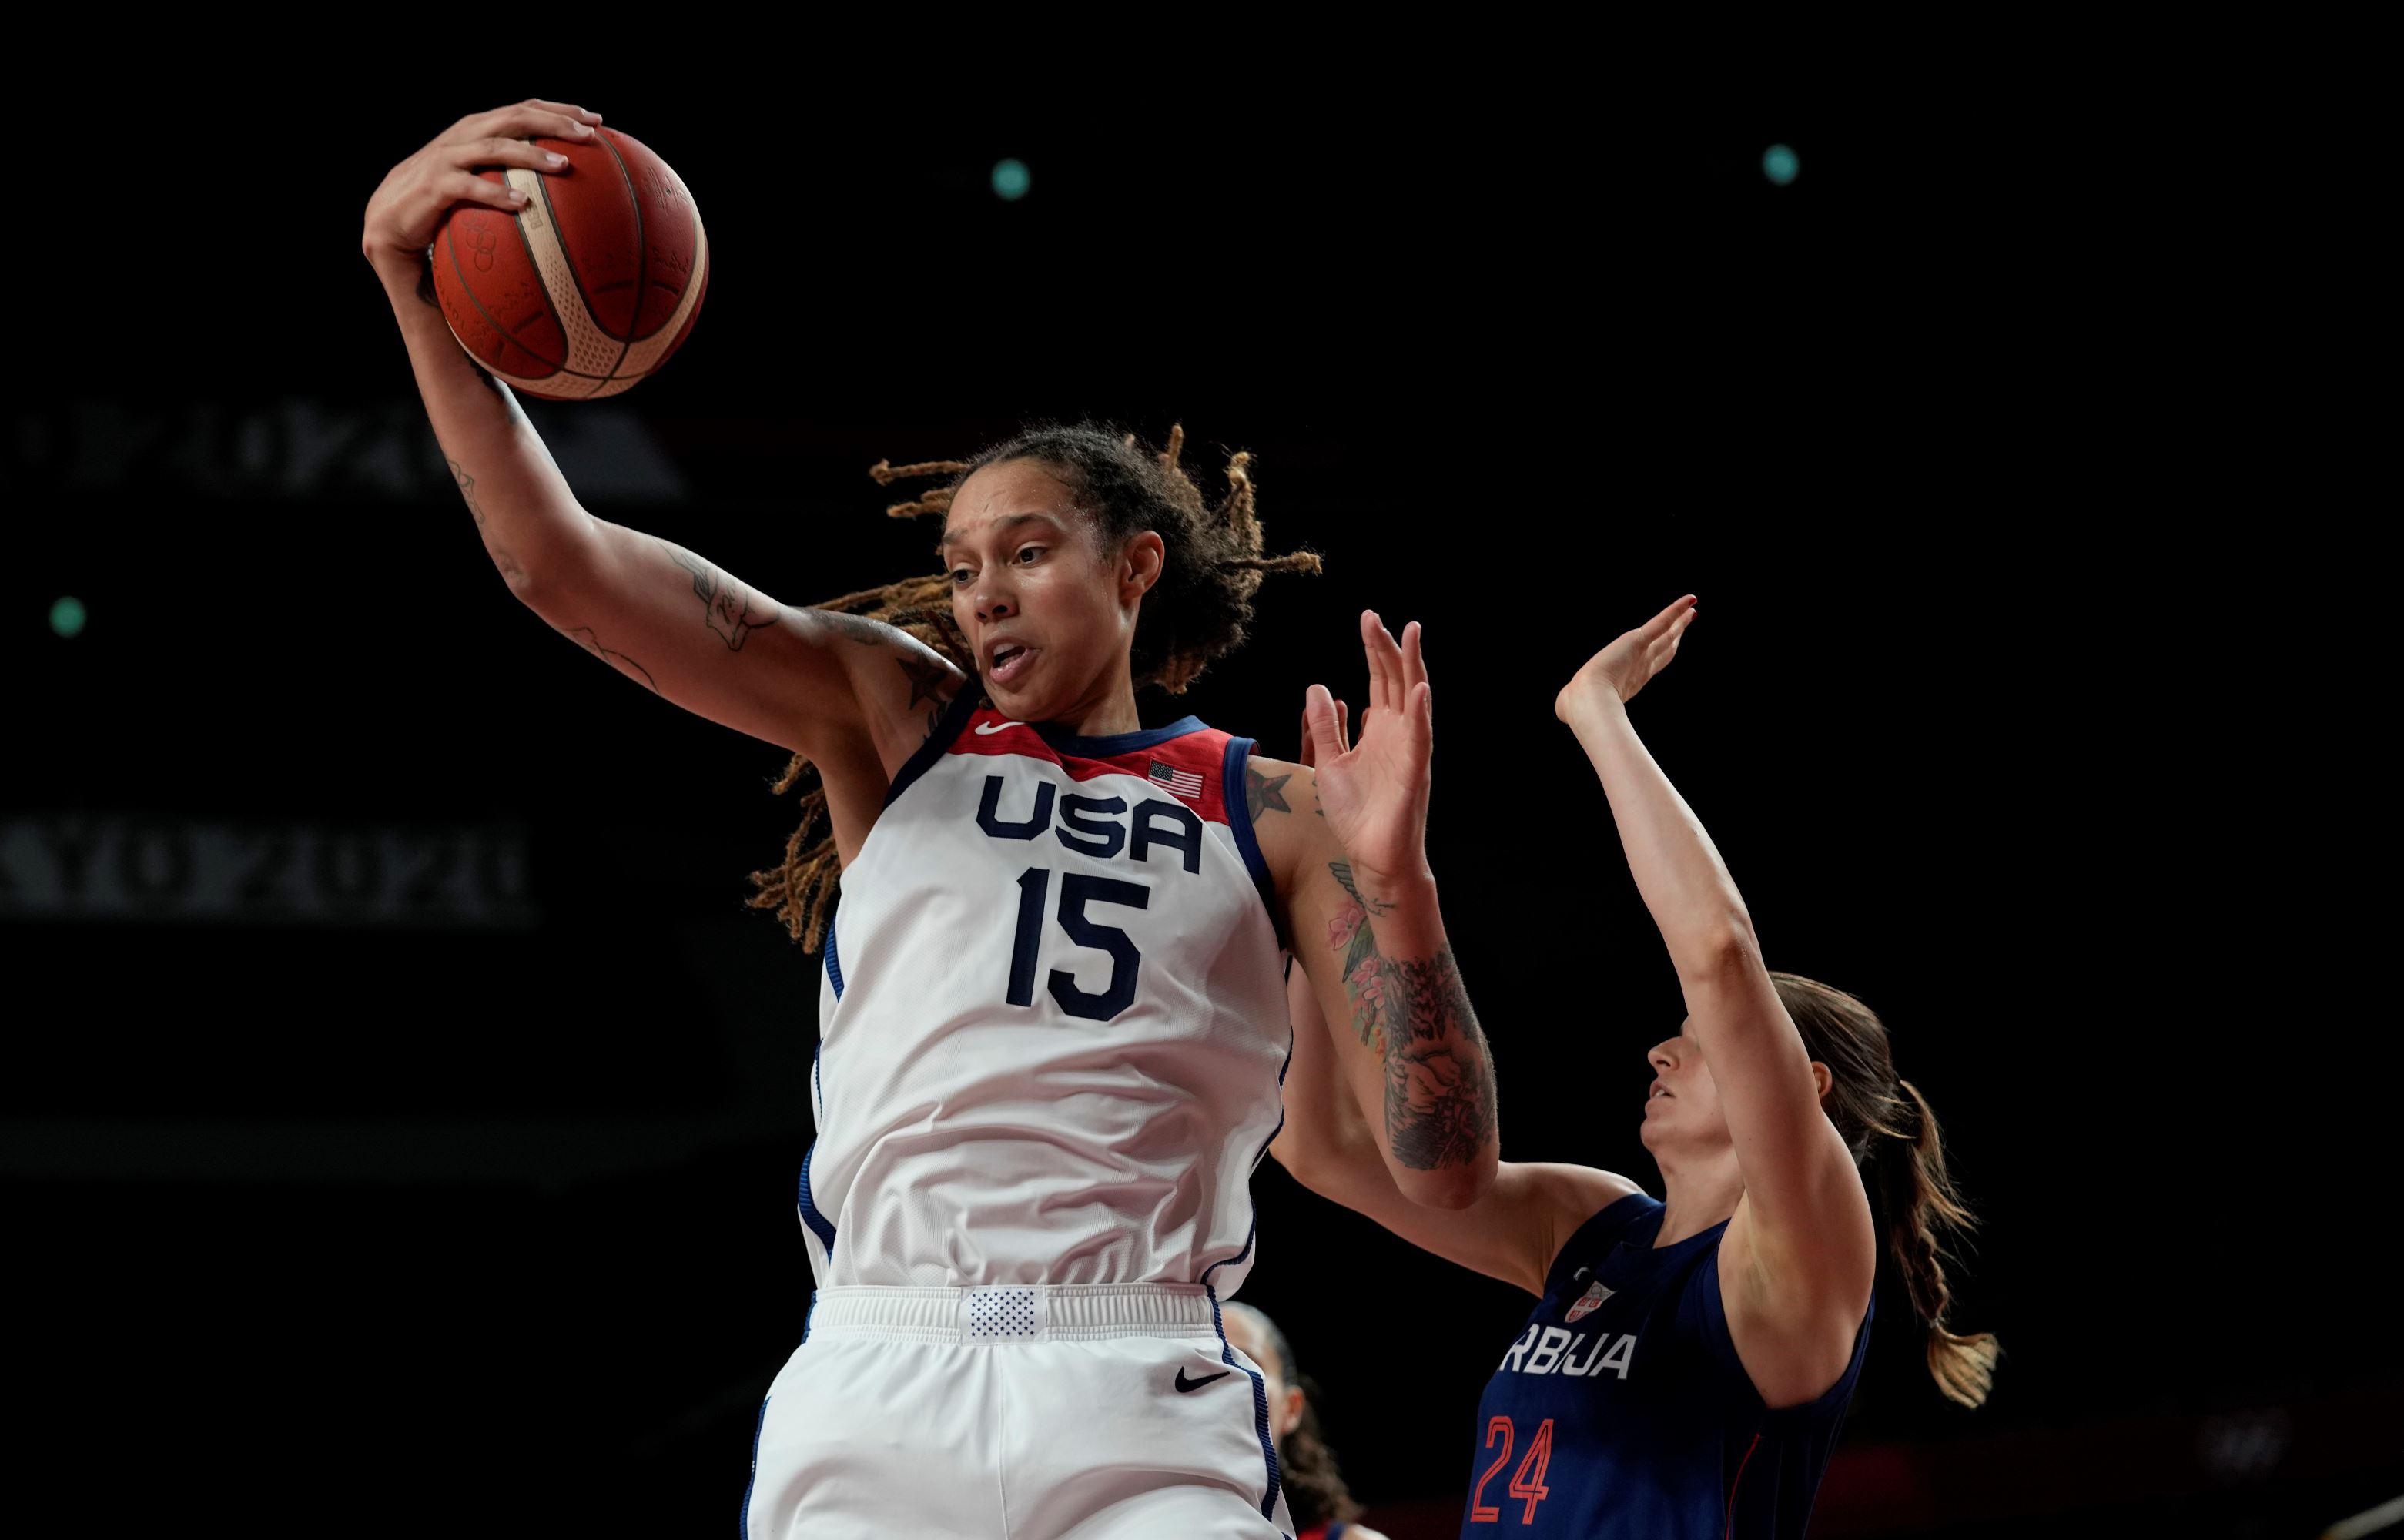 brittney-griner-named-ap-comeback-player-of-the-year-after-russia-arrest